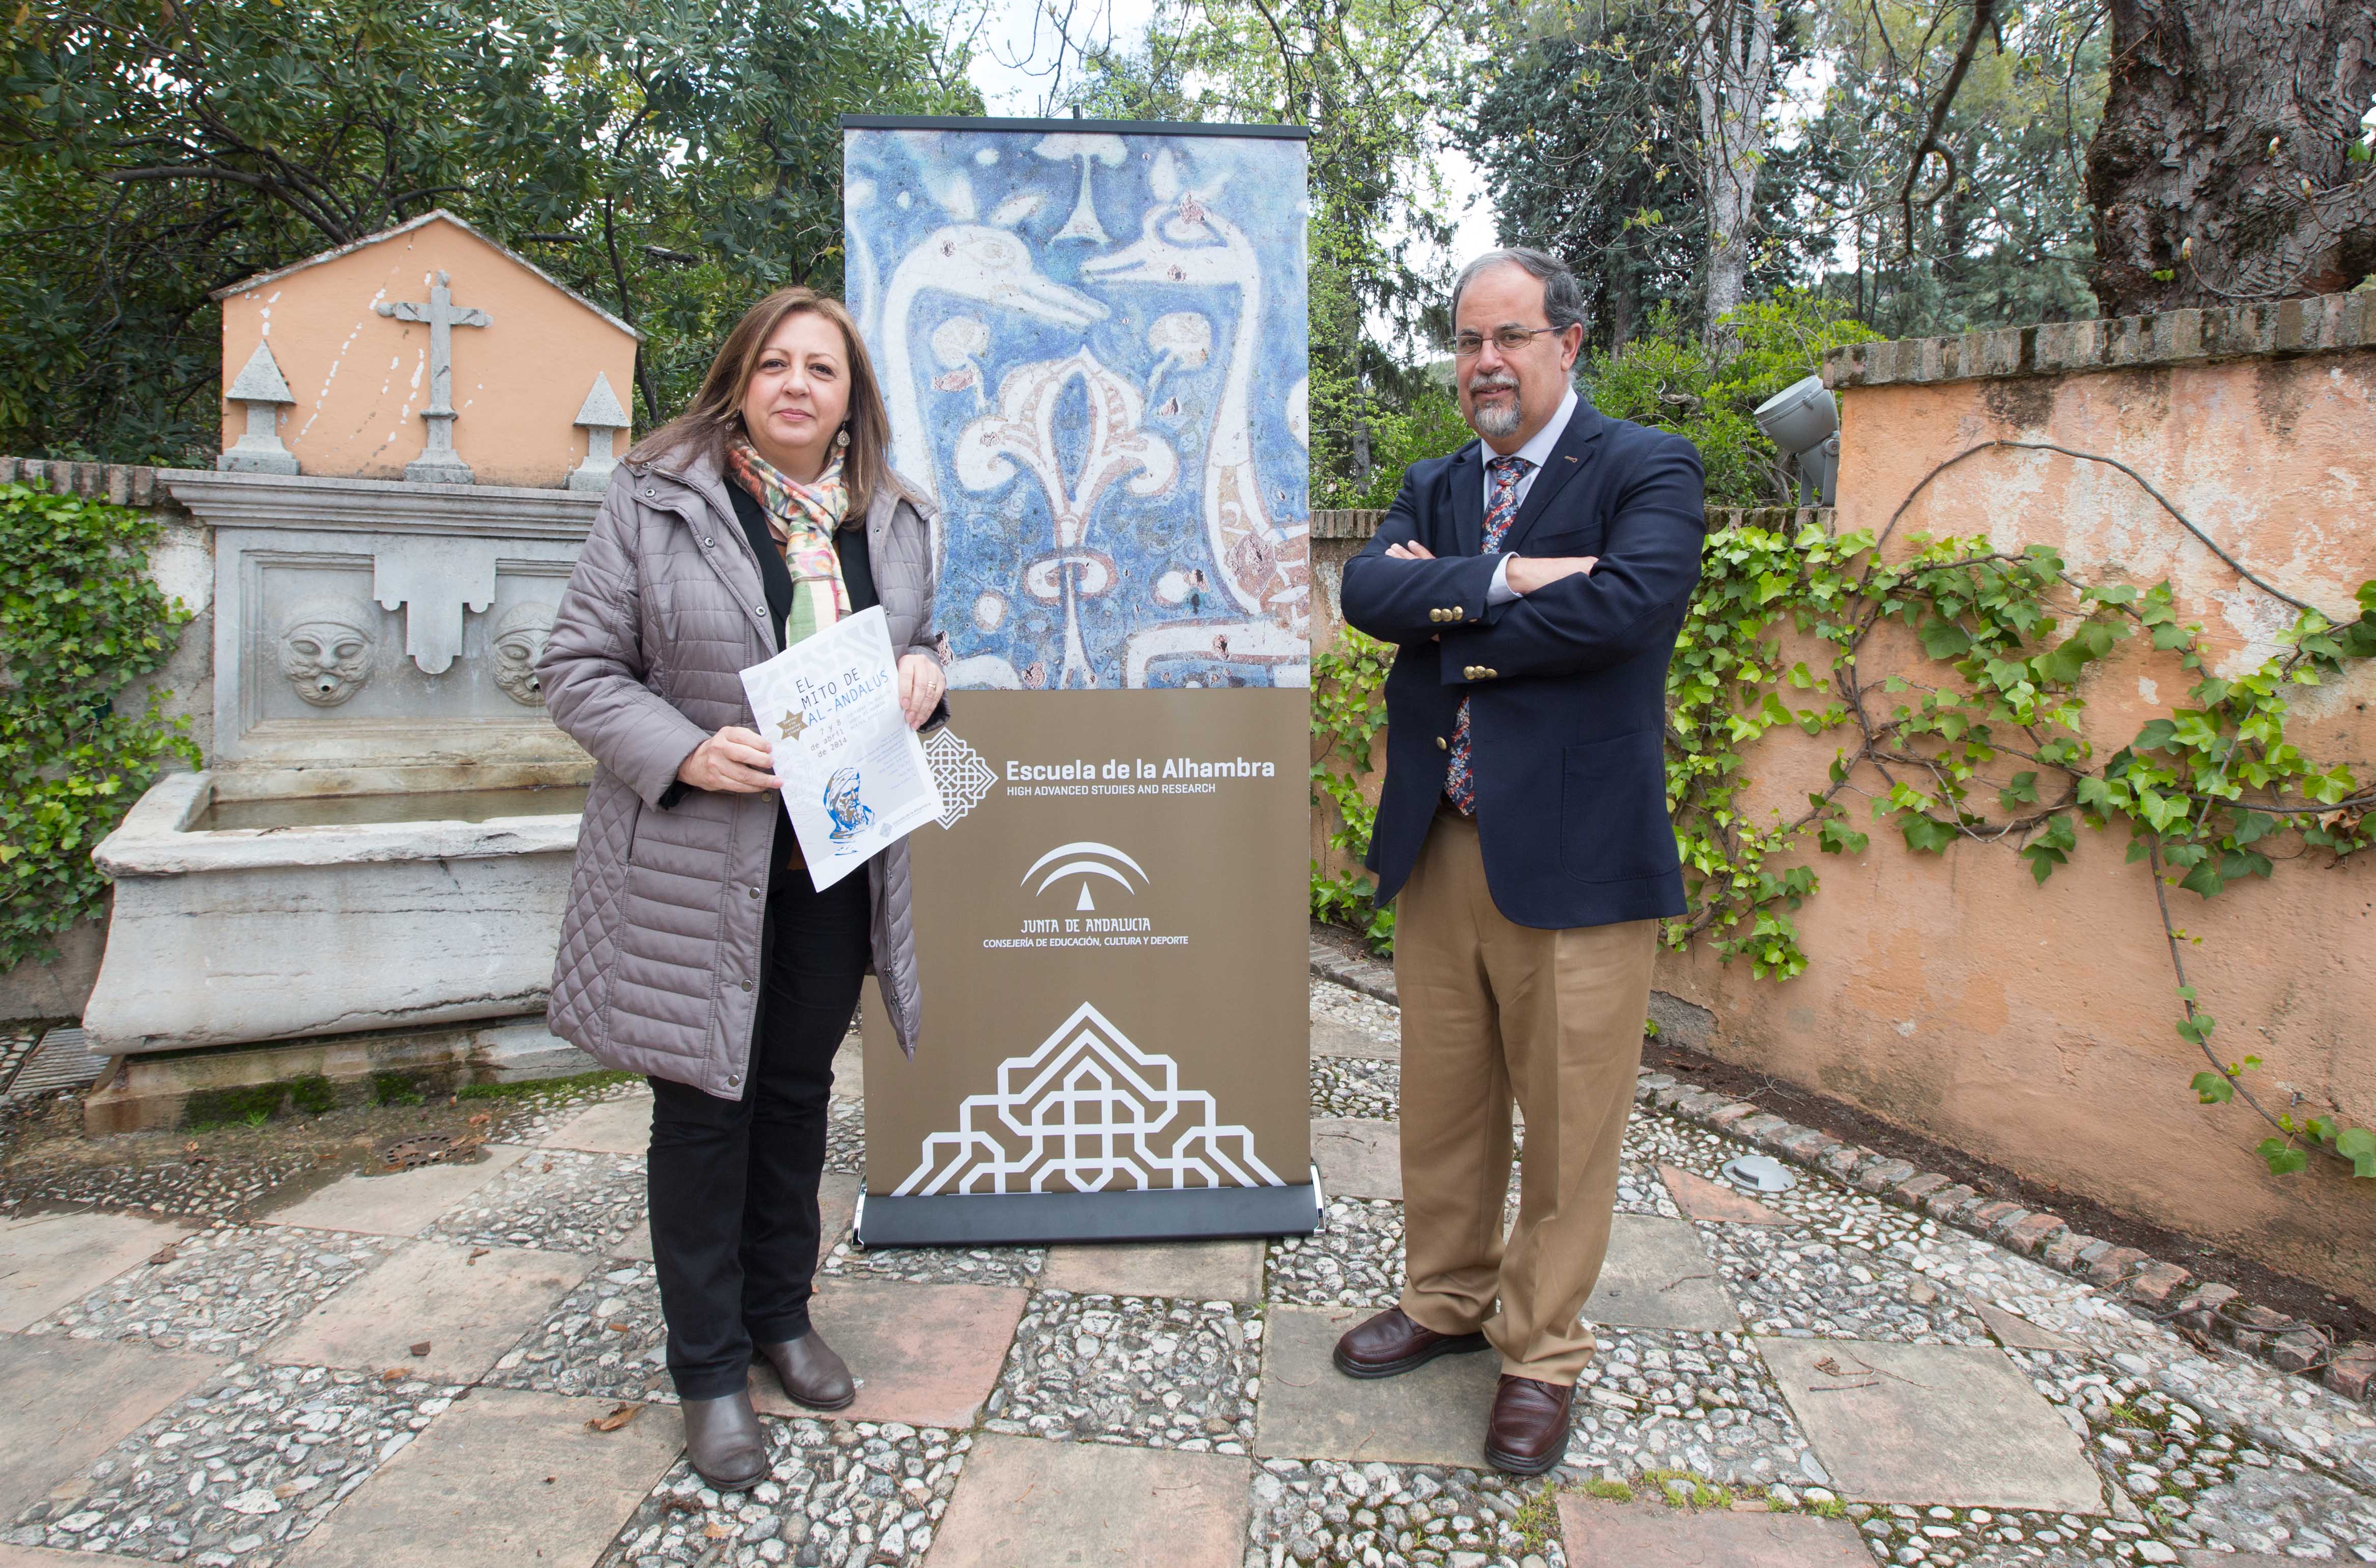 The School of the Alhambra sets out on its academic journey with an International Seminar on the Myth of al-Andalus.